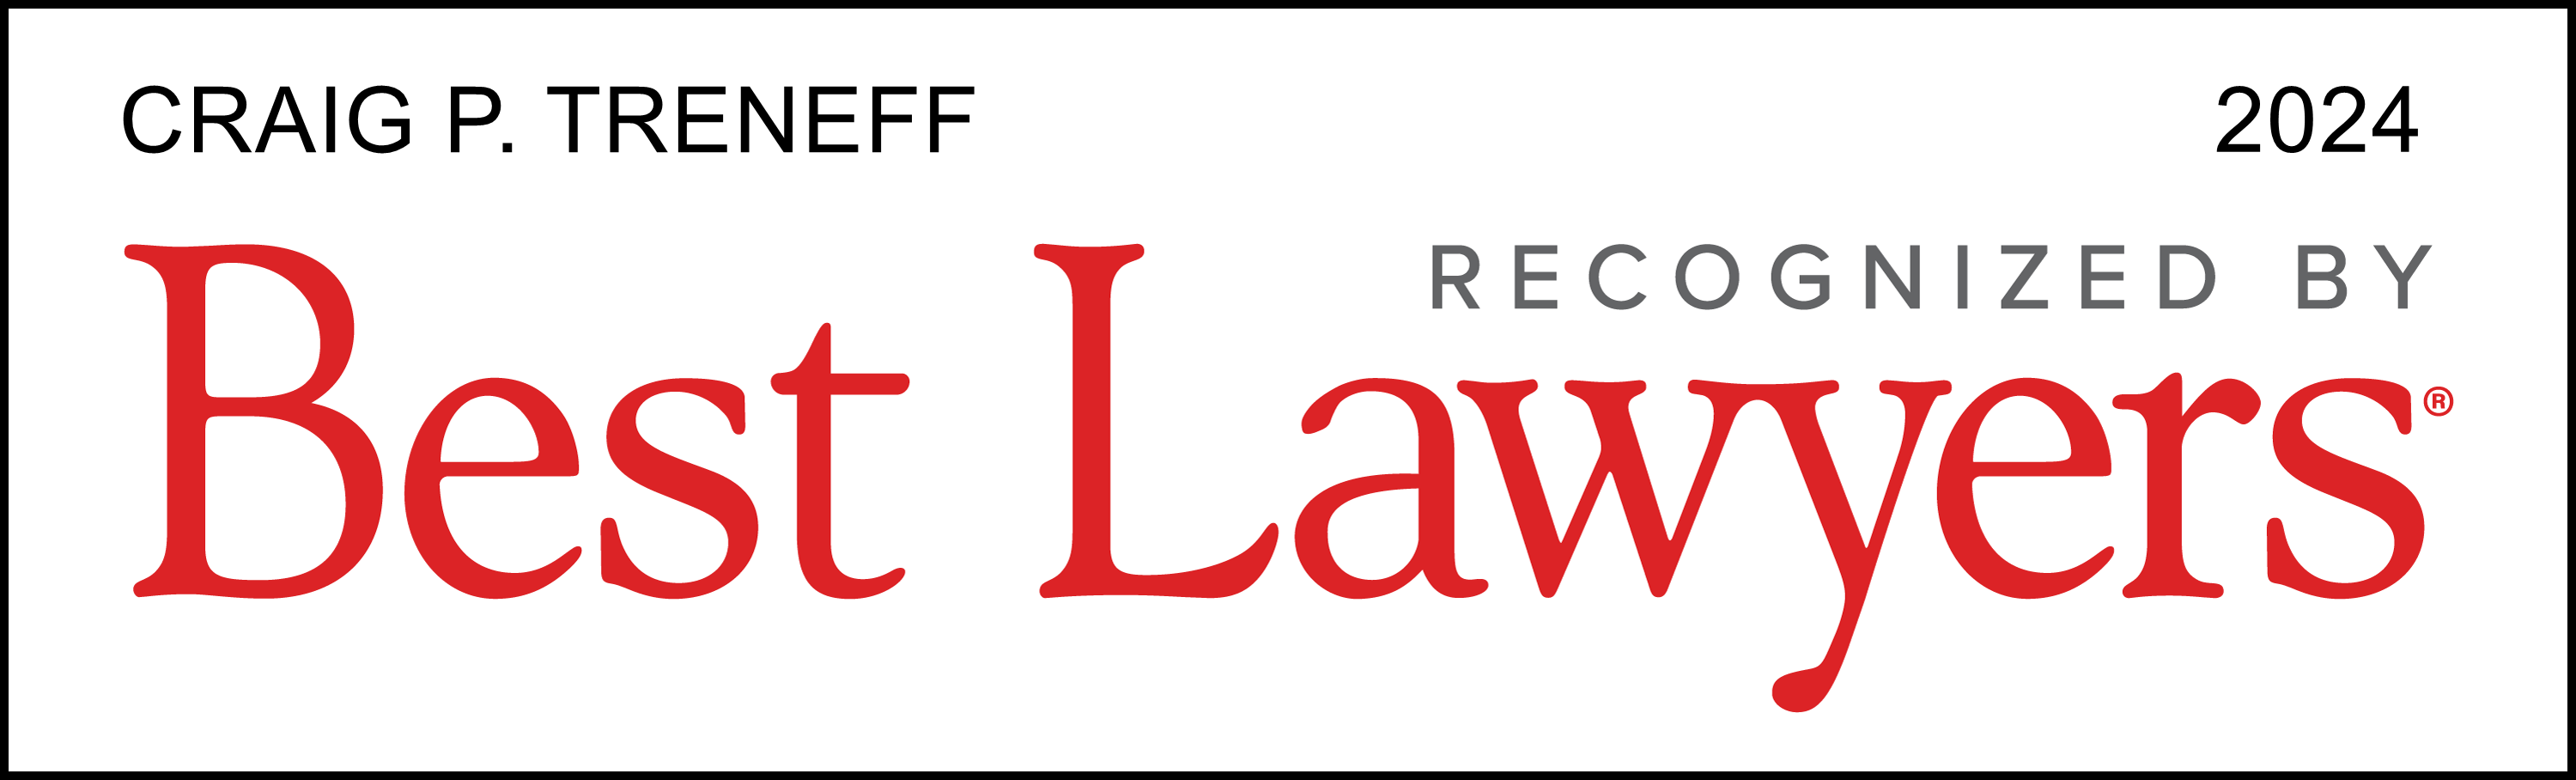 Craig P. Treneff | Recognized By Best Lawyers | 2024